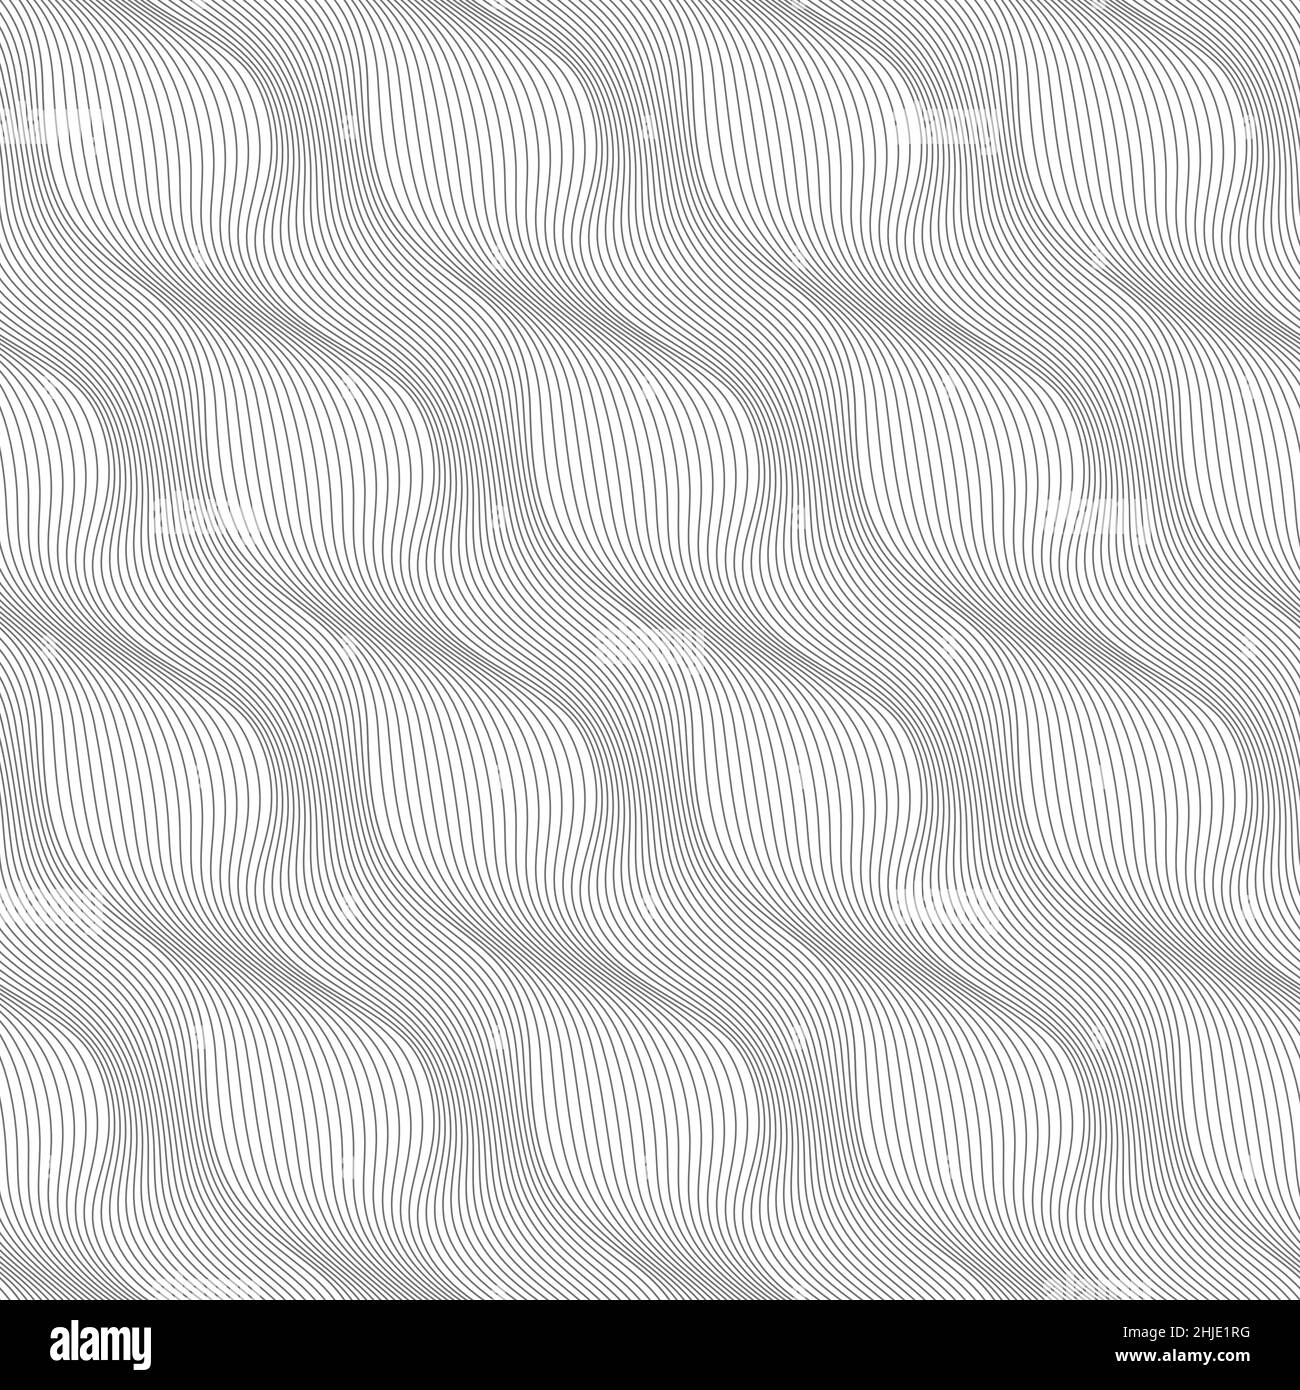 Abstract Grey Curve Line Vector Seamless Pattern Design Stock Vector